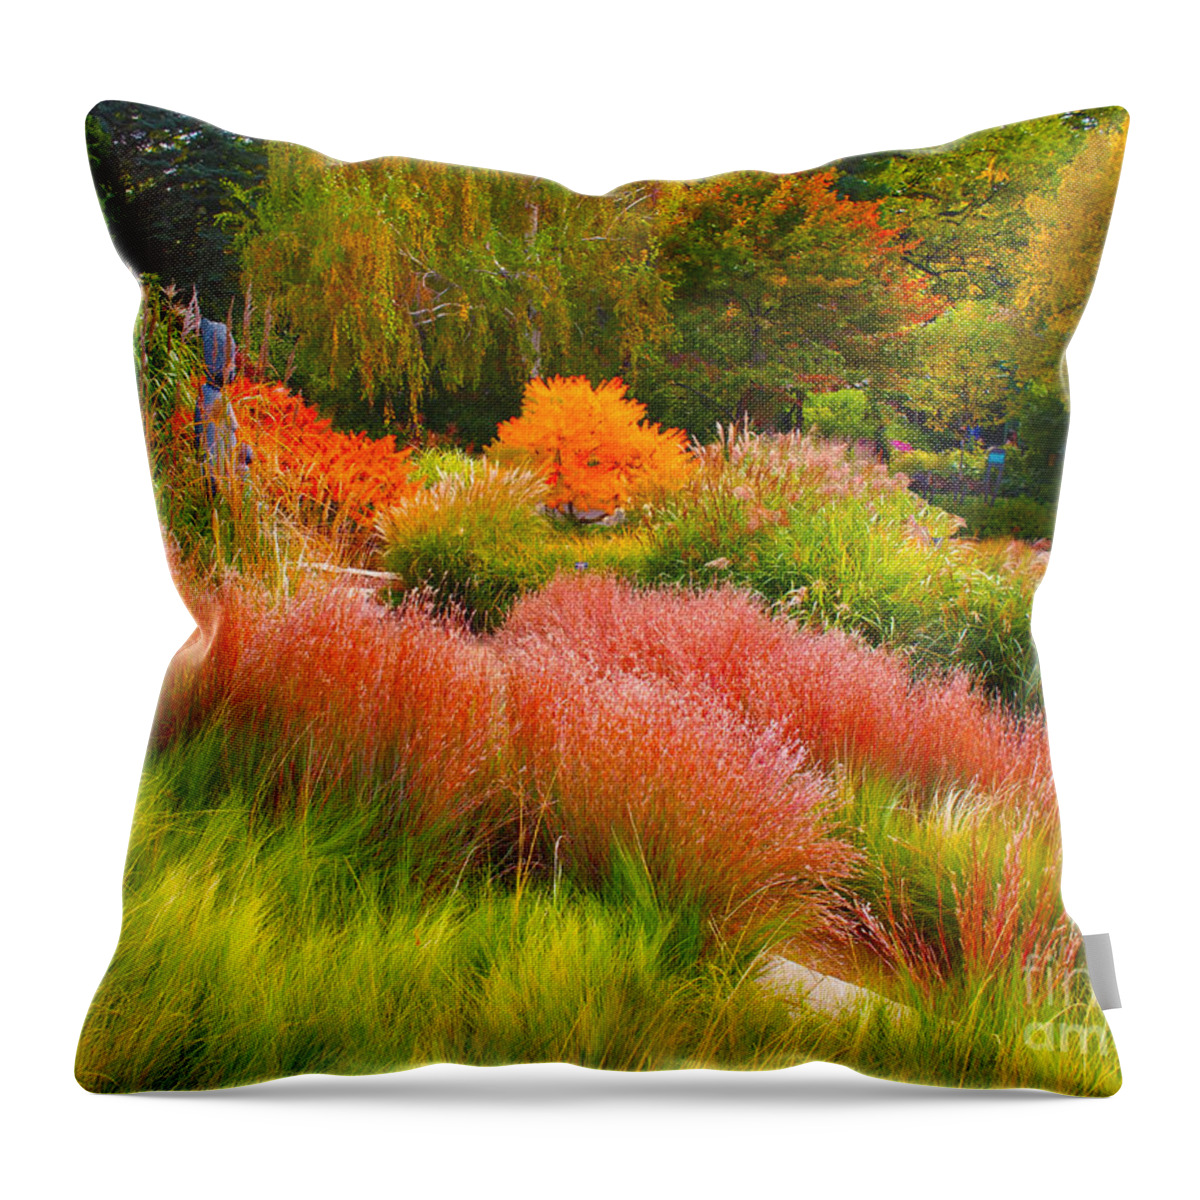 Gardens Throw Pillow featuring the photograph Just being Natural in a Garden by Joseph Mora